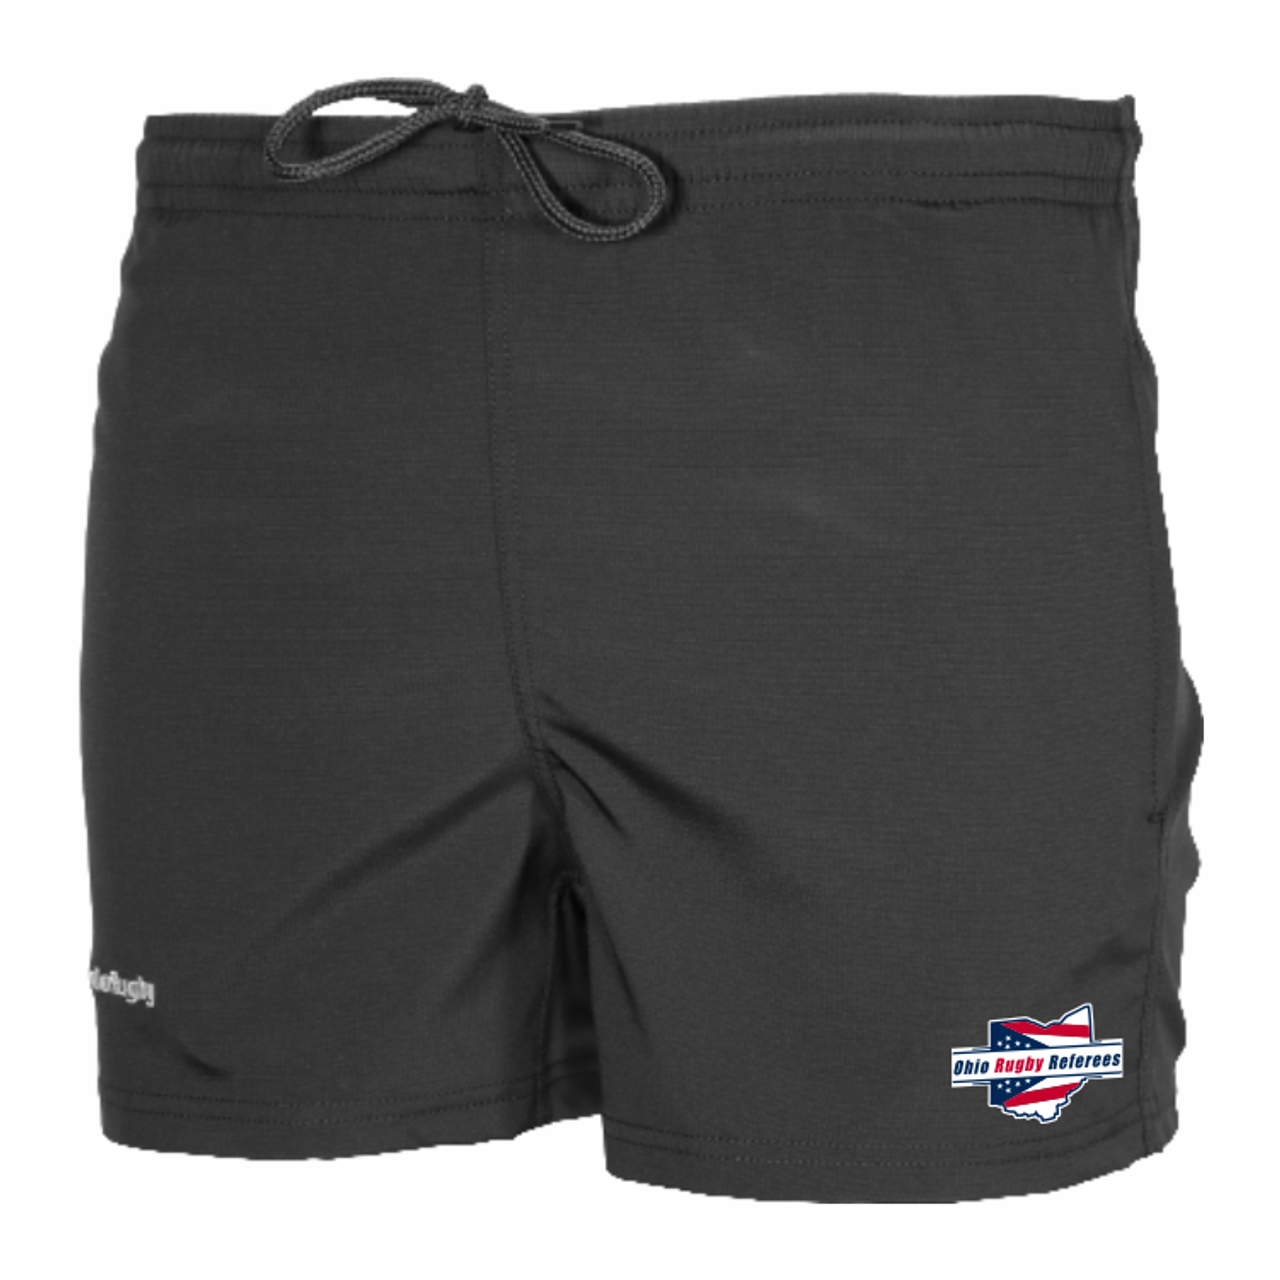 Ohio Rugby Referees Zippered Pocket Performance Shorts